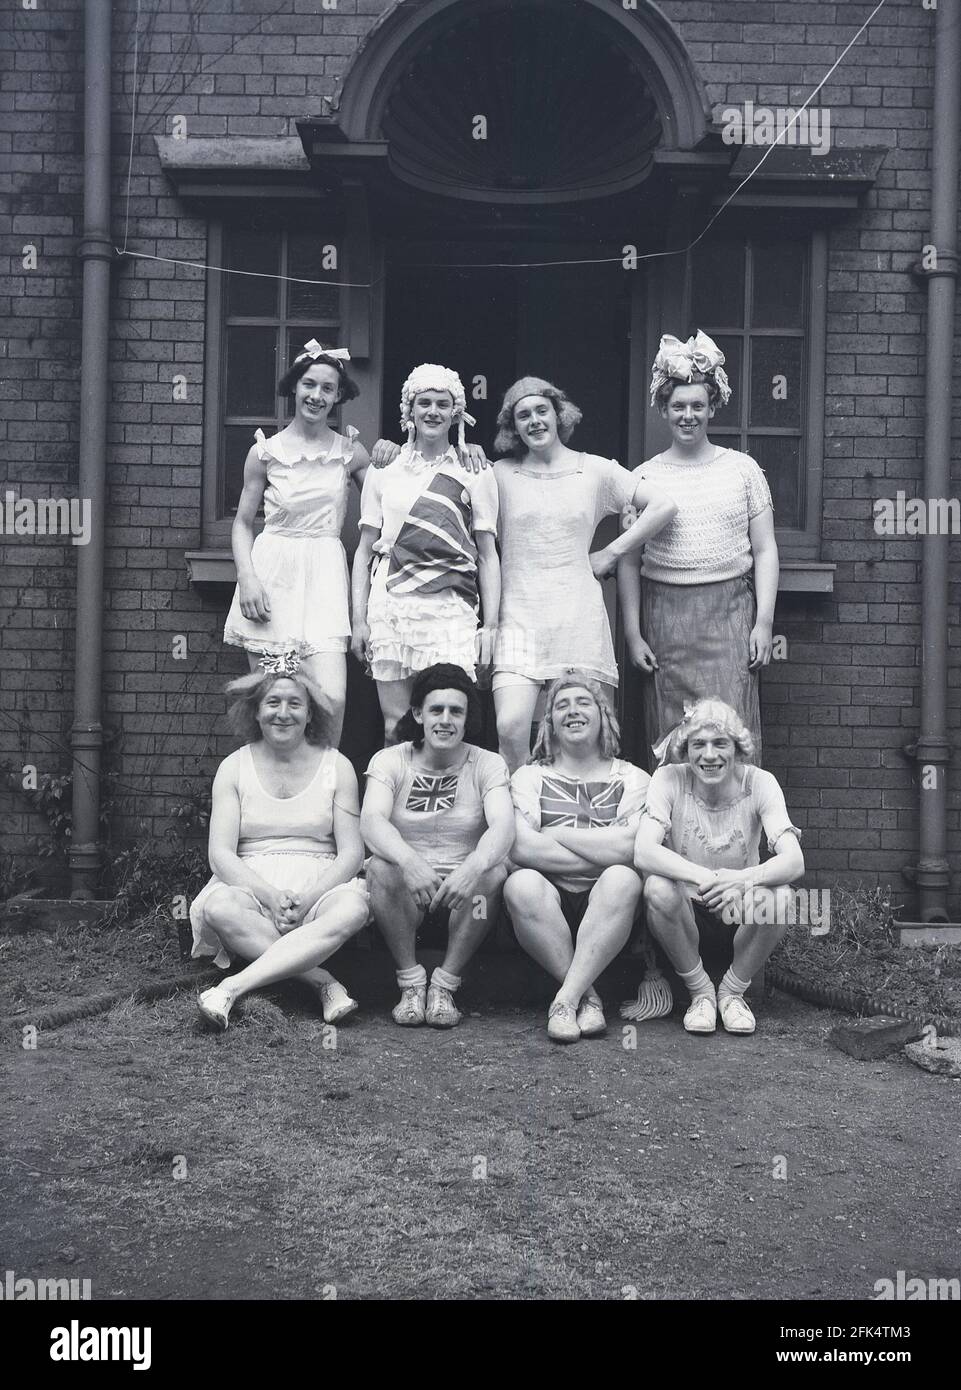 1950s, historical, standing outside at an entrance to a building, a group of local men - 'the Heavy Gang', England, UK. Dressed up in women's clothes and attired with Union Jacks, they will perform their 'Gang Show' in the May Day celebrations. May Day was an ancient tradition which celebrated the arrival of Spring and Summer and performers would  dress up and re-enact old folklore and stories with dancing around a tall wooden pole, a maypole, a popular activity. Stock Photo